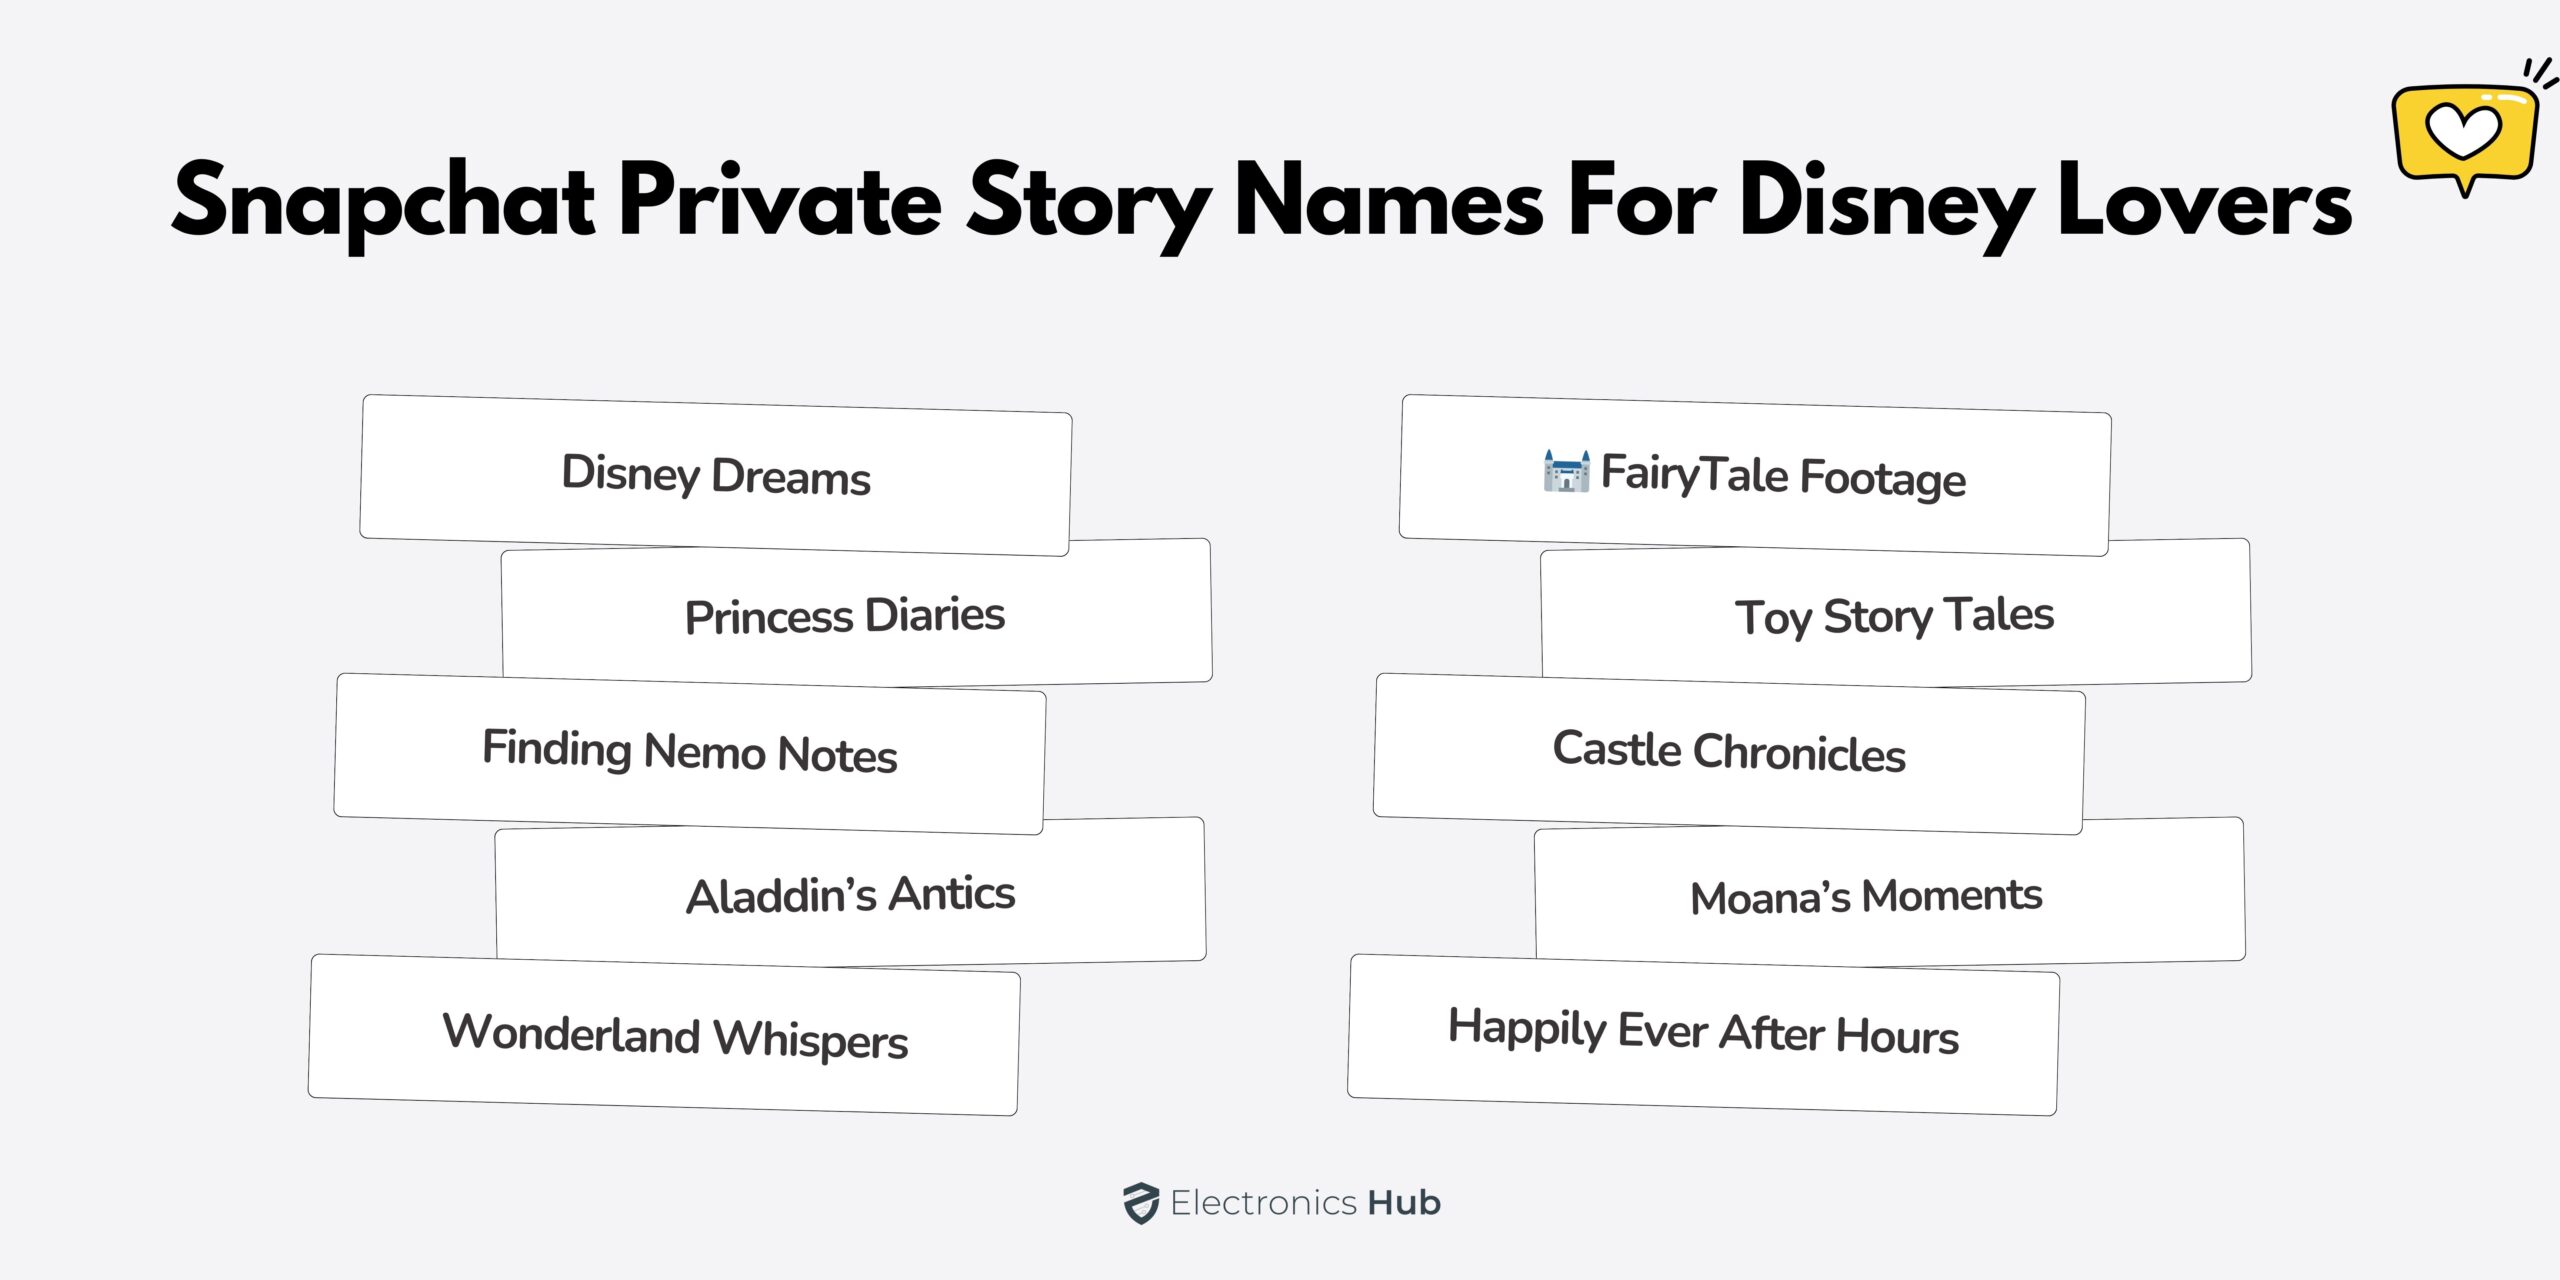 Snapchat Private Story Names for Disney Lovers